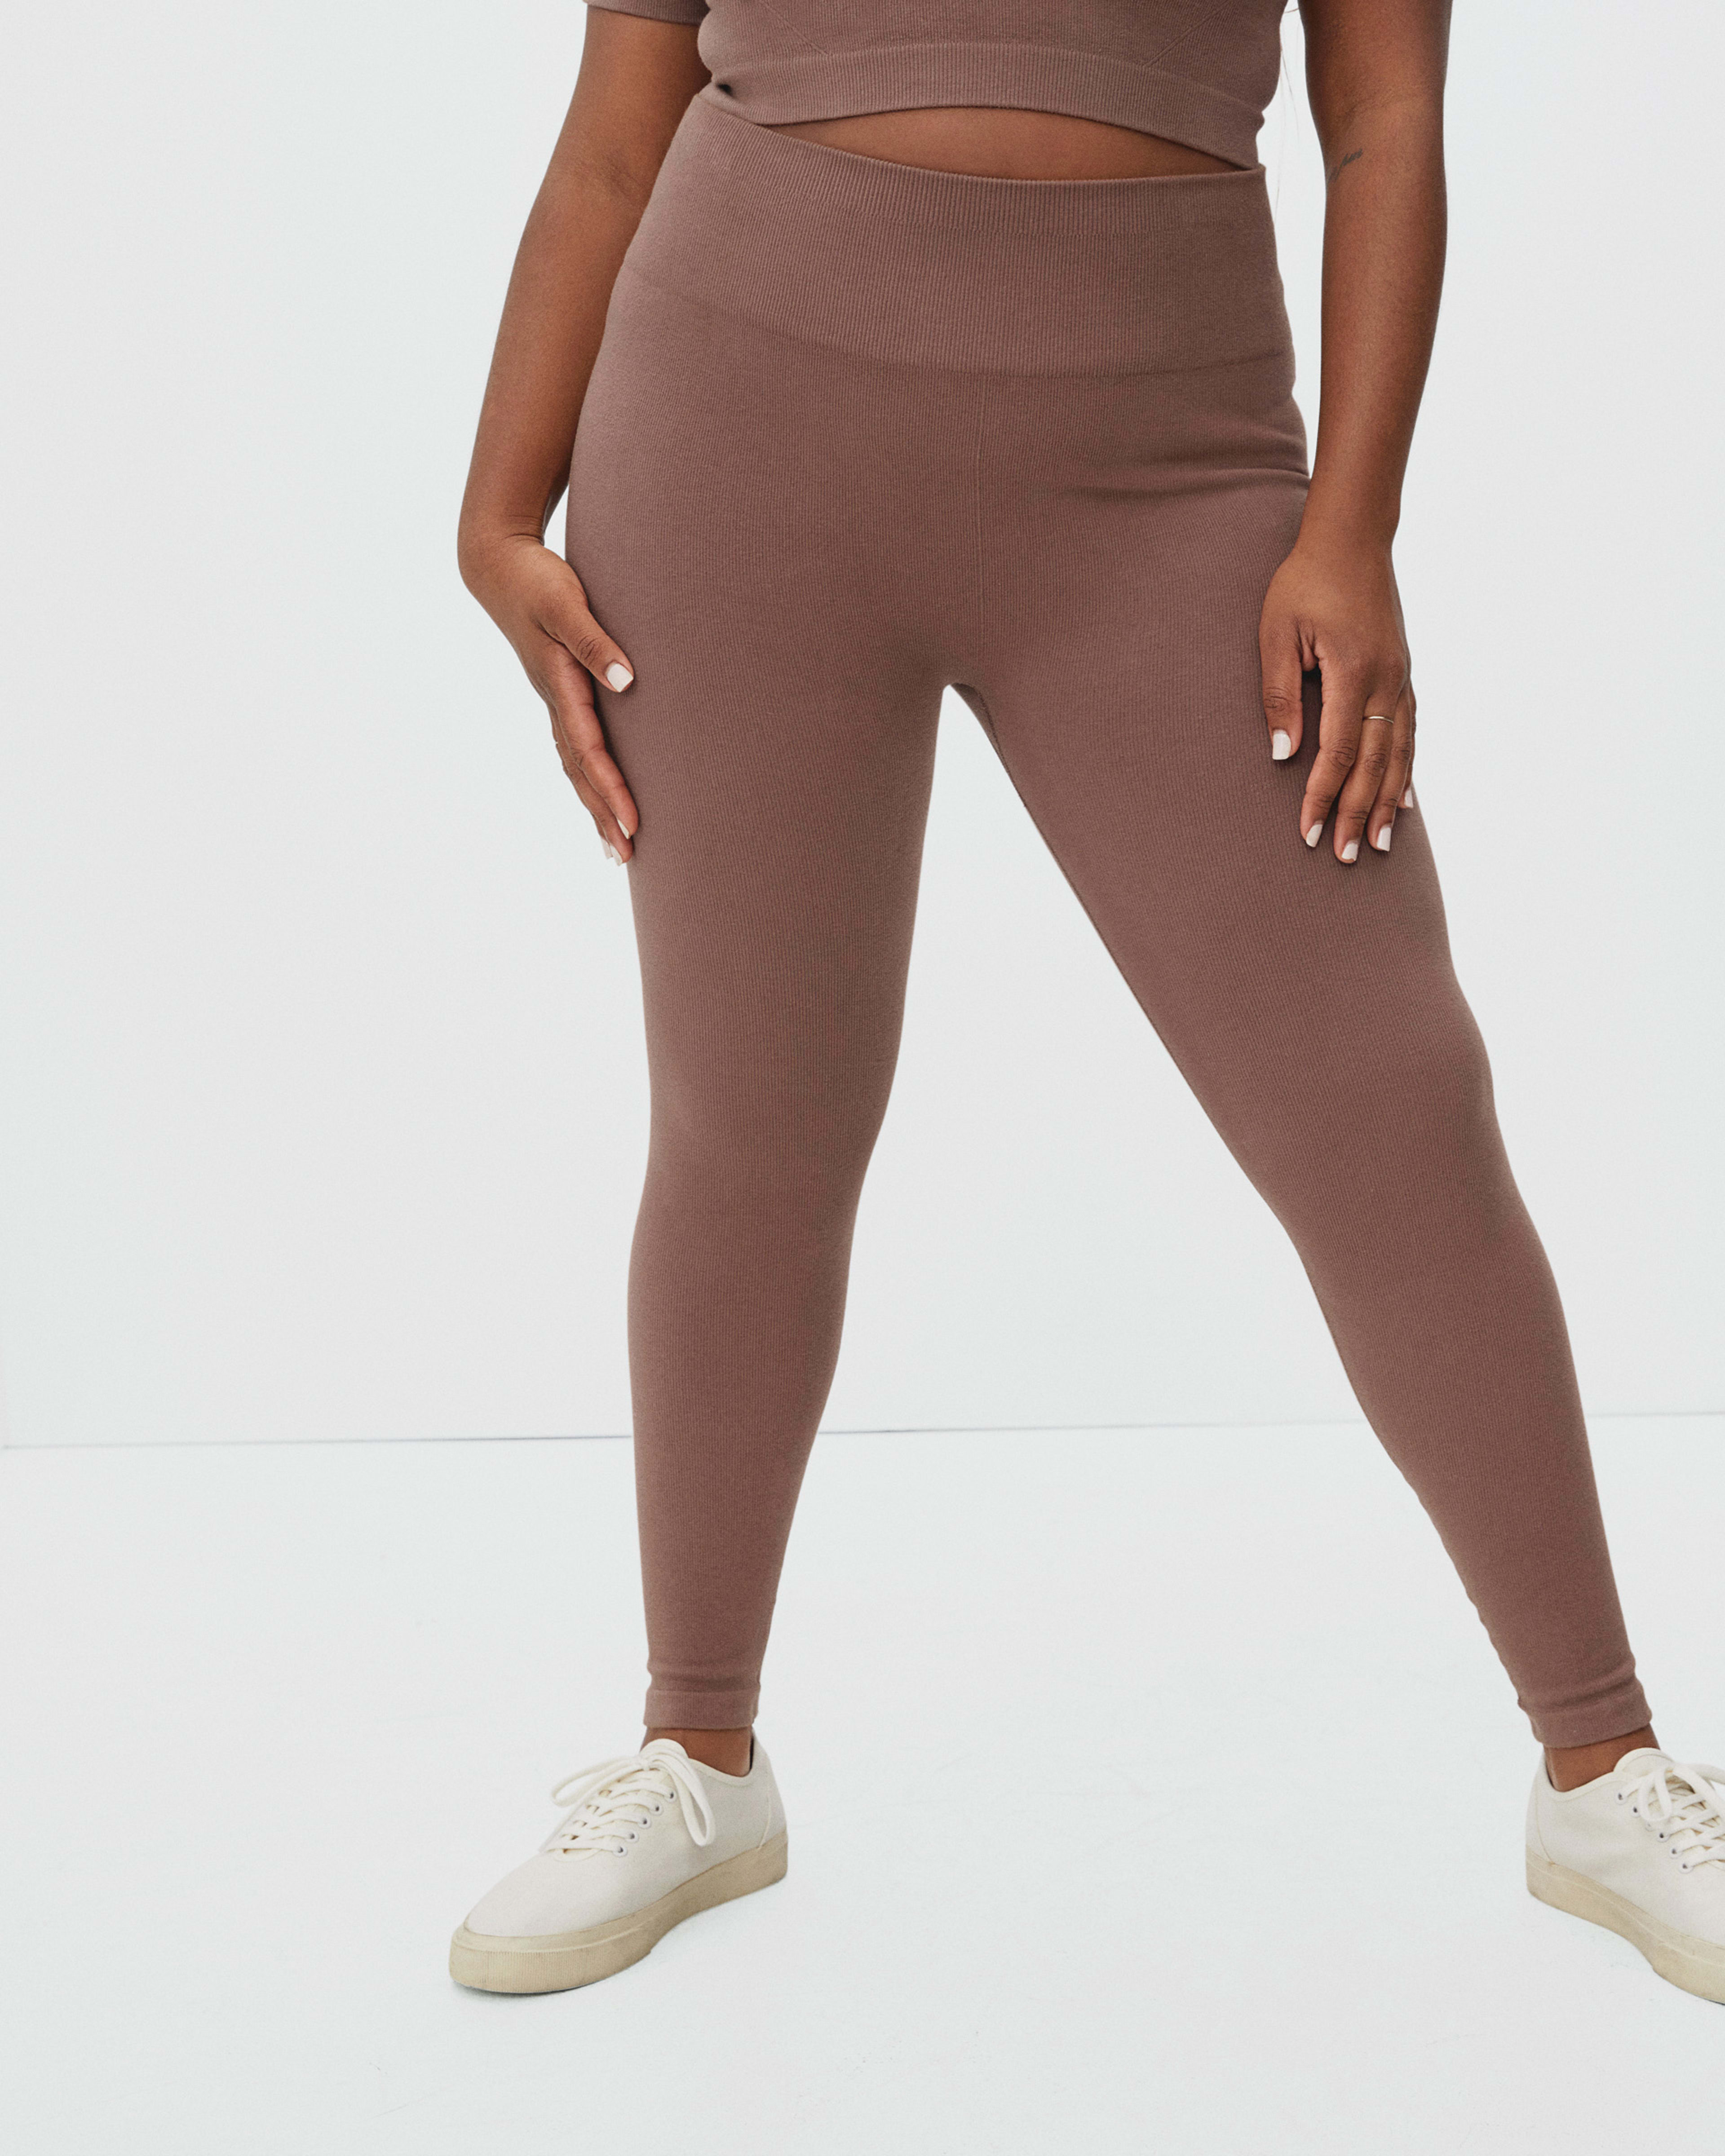 Athletic Works Workout Leggings Black - $11 (38% Off Retail